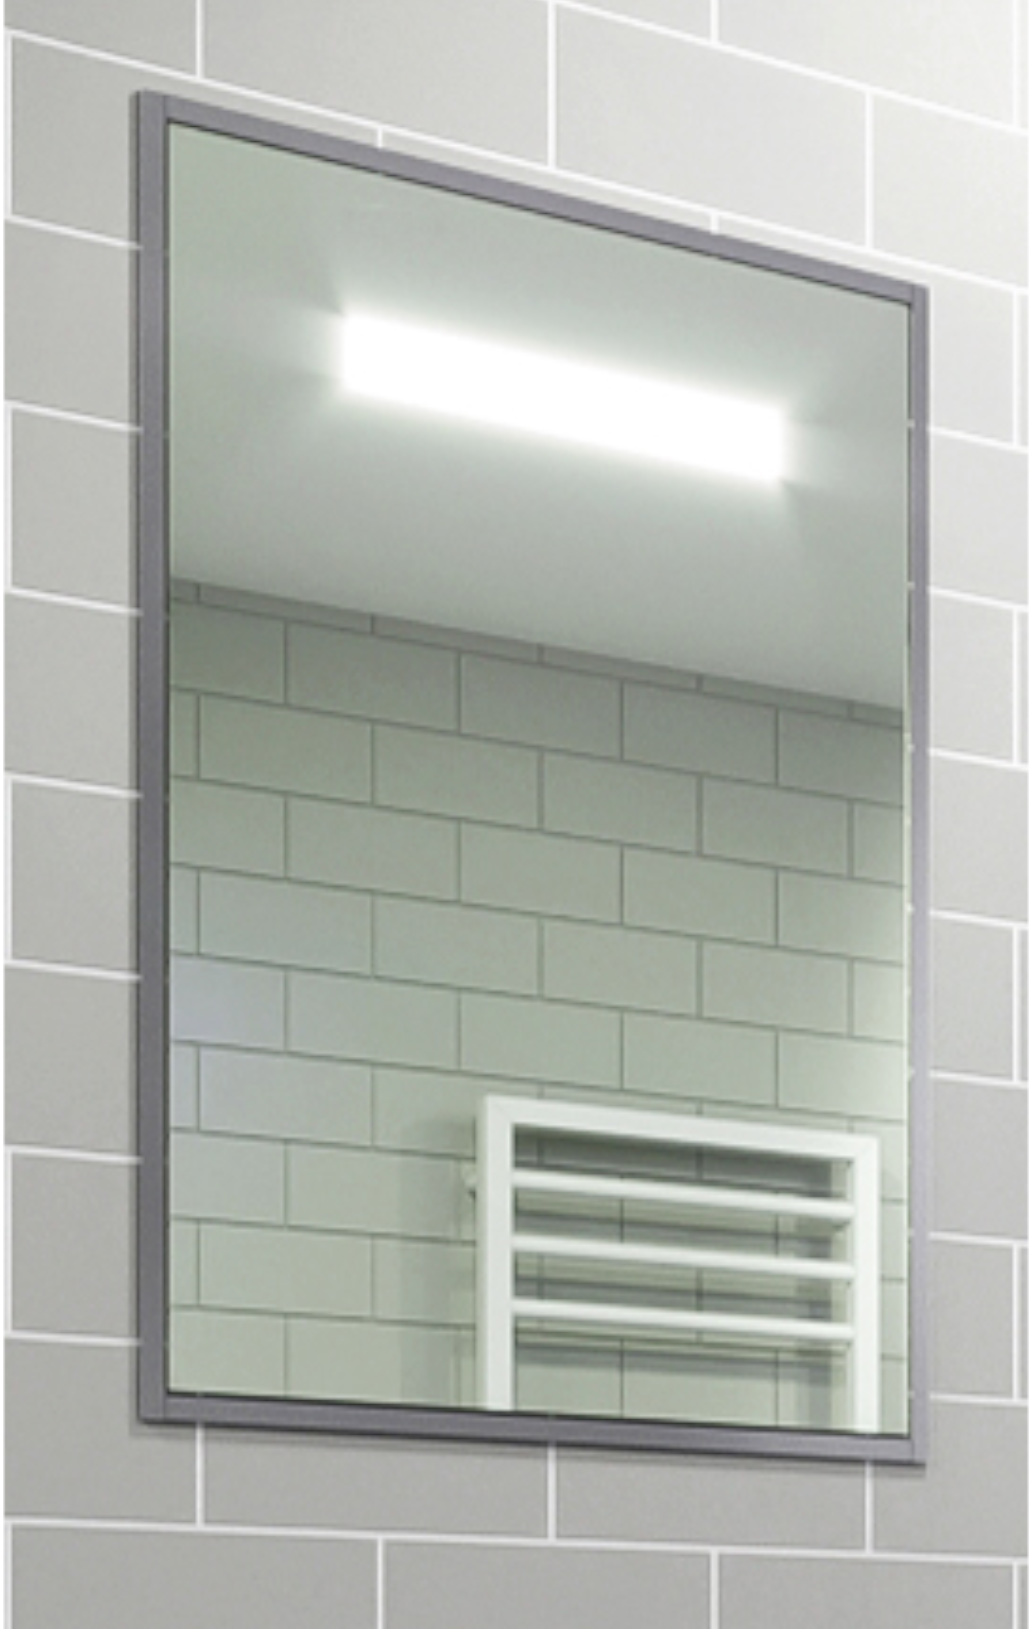 Abacus Melford Silver Surround LED Recessed Mirror Cabinet with Integrated Shaver Socket - 700 x 500mm